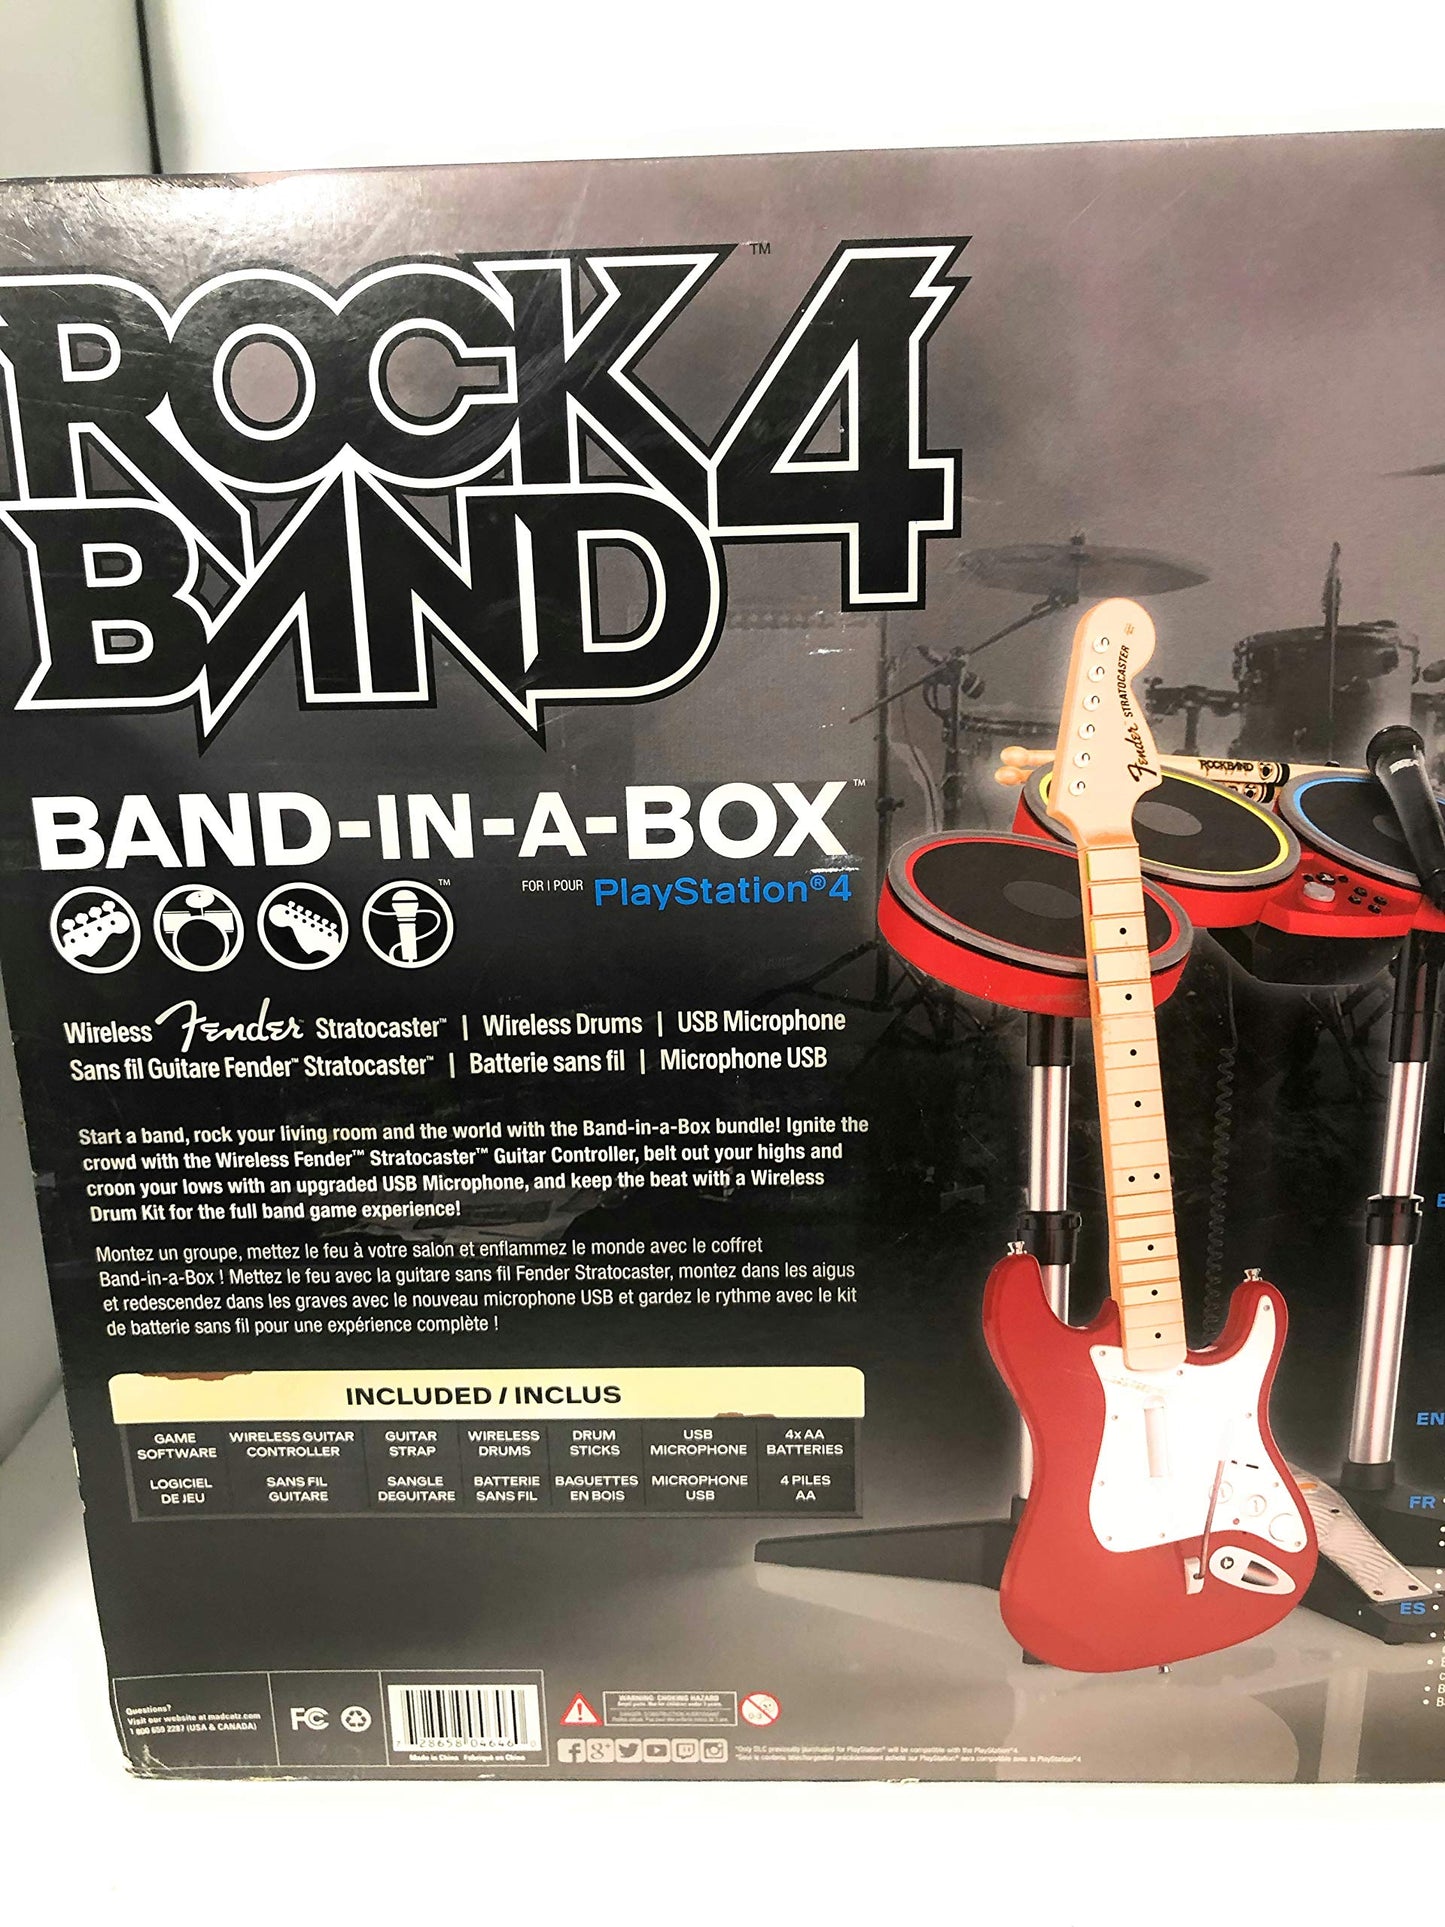 Playstation 4 Rock Band 4 Exclusive RED Band In-A-Box Bundle